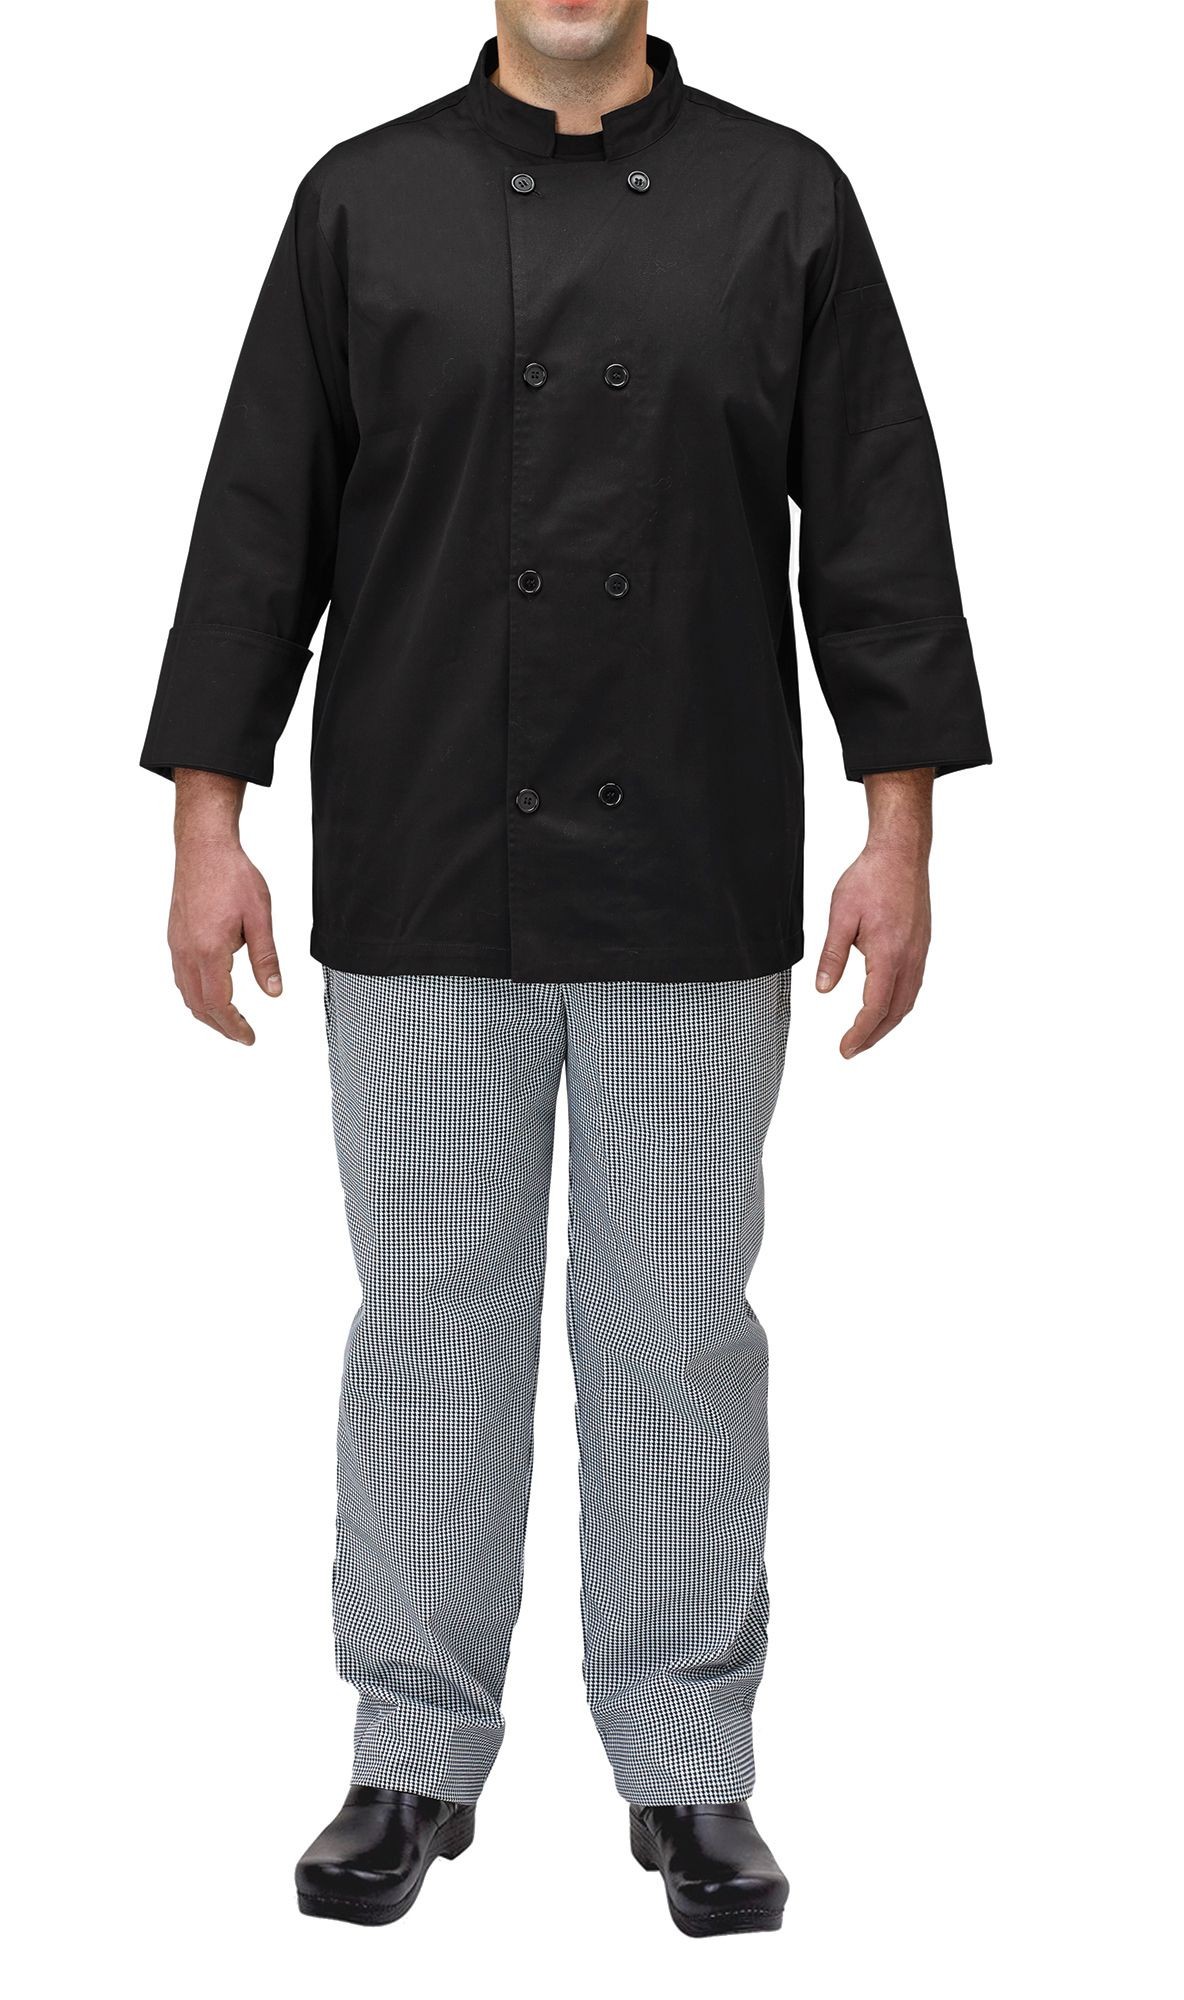 Winco UNF-5KL Black Poly-Cotton Blend Double Breasted Chef Jacket with Pocket, Large